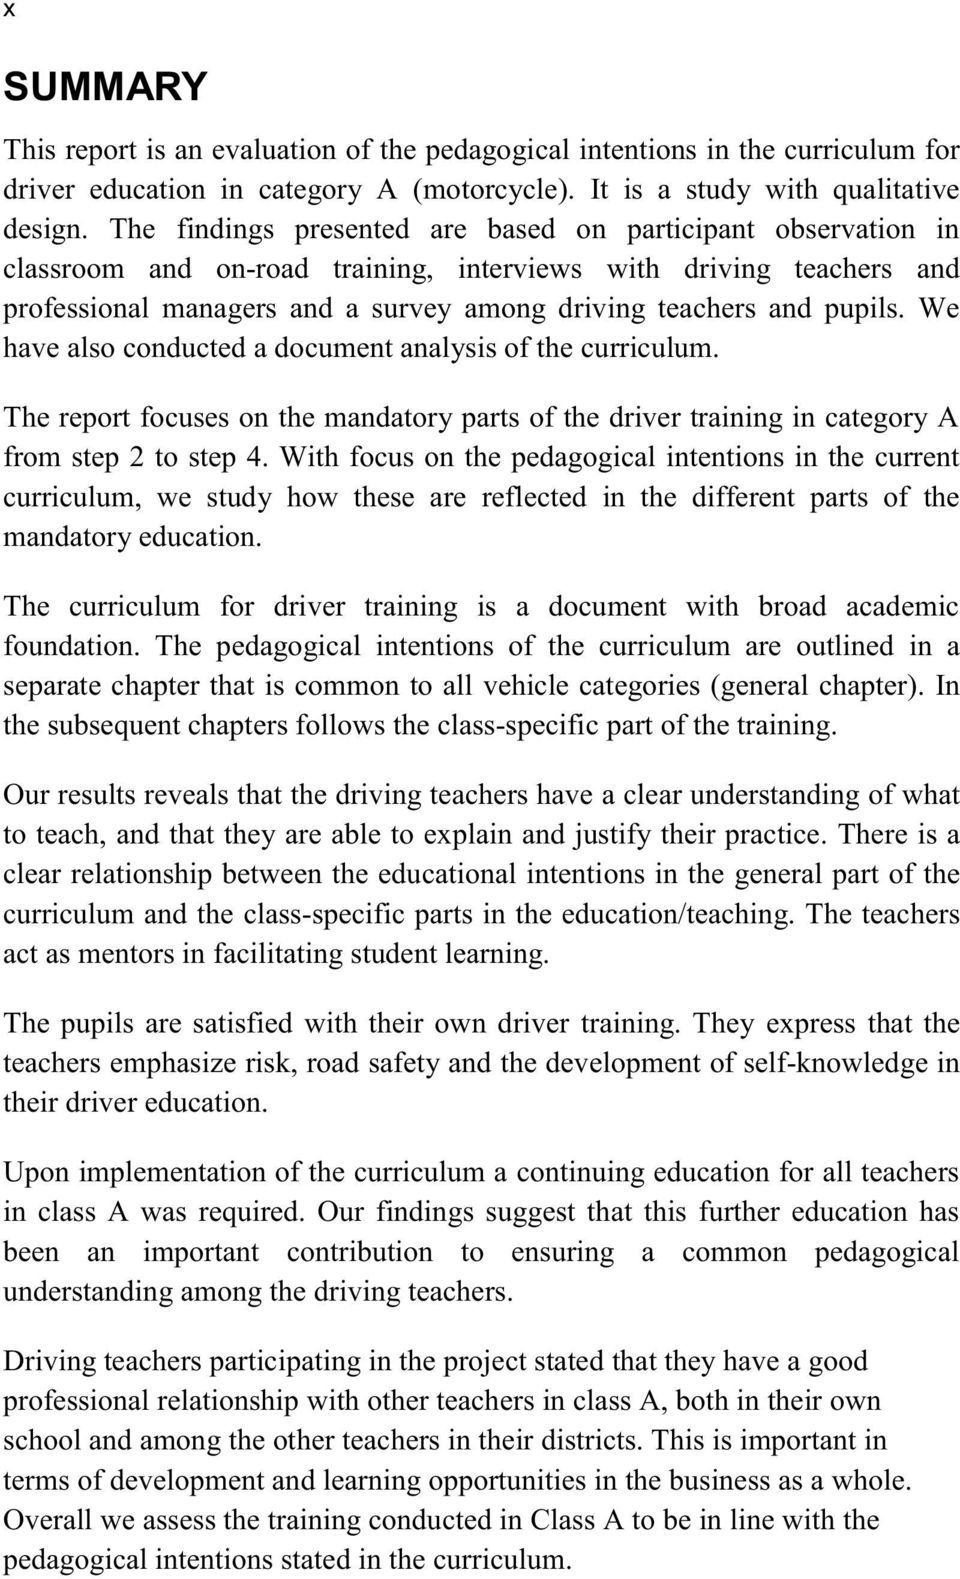 pupils. We have also conducted a document analysis of the curriculum. The report focuses on the mandatory parts of the driver training in category A from step 2 to step 4.